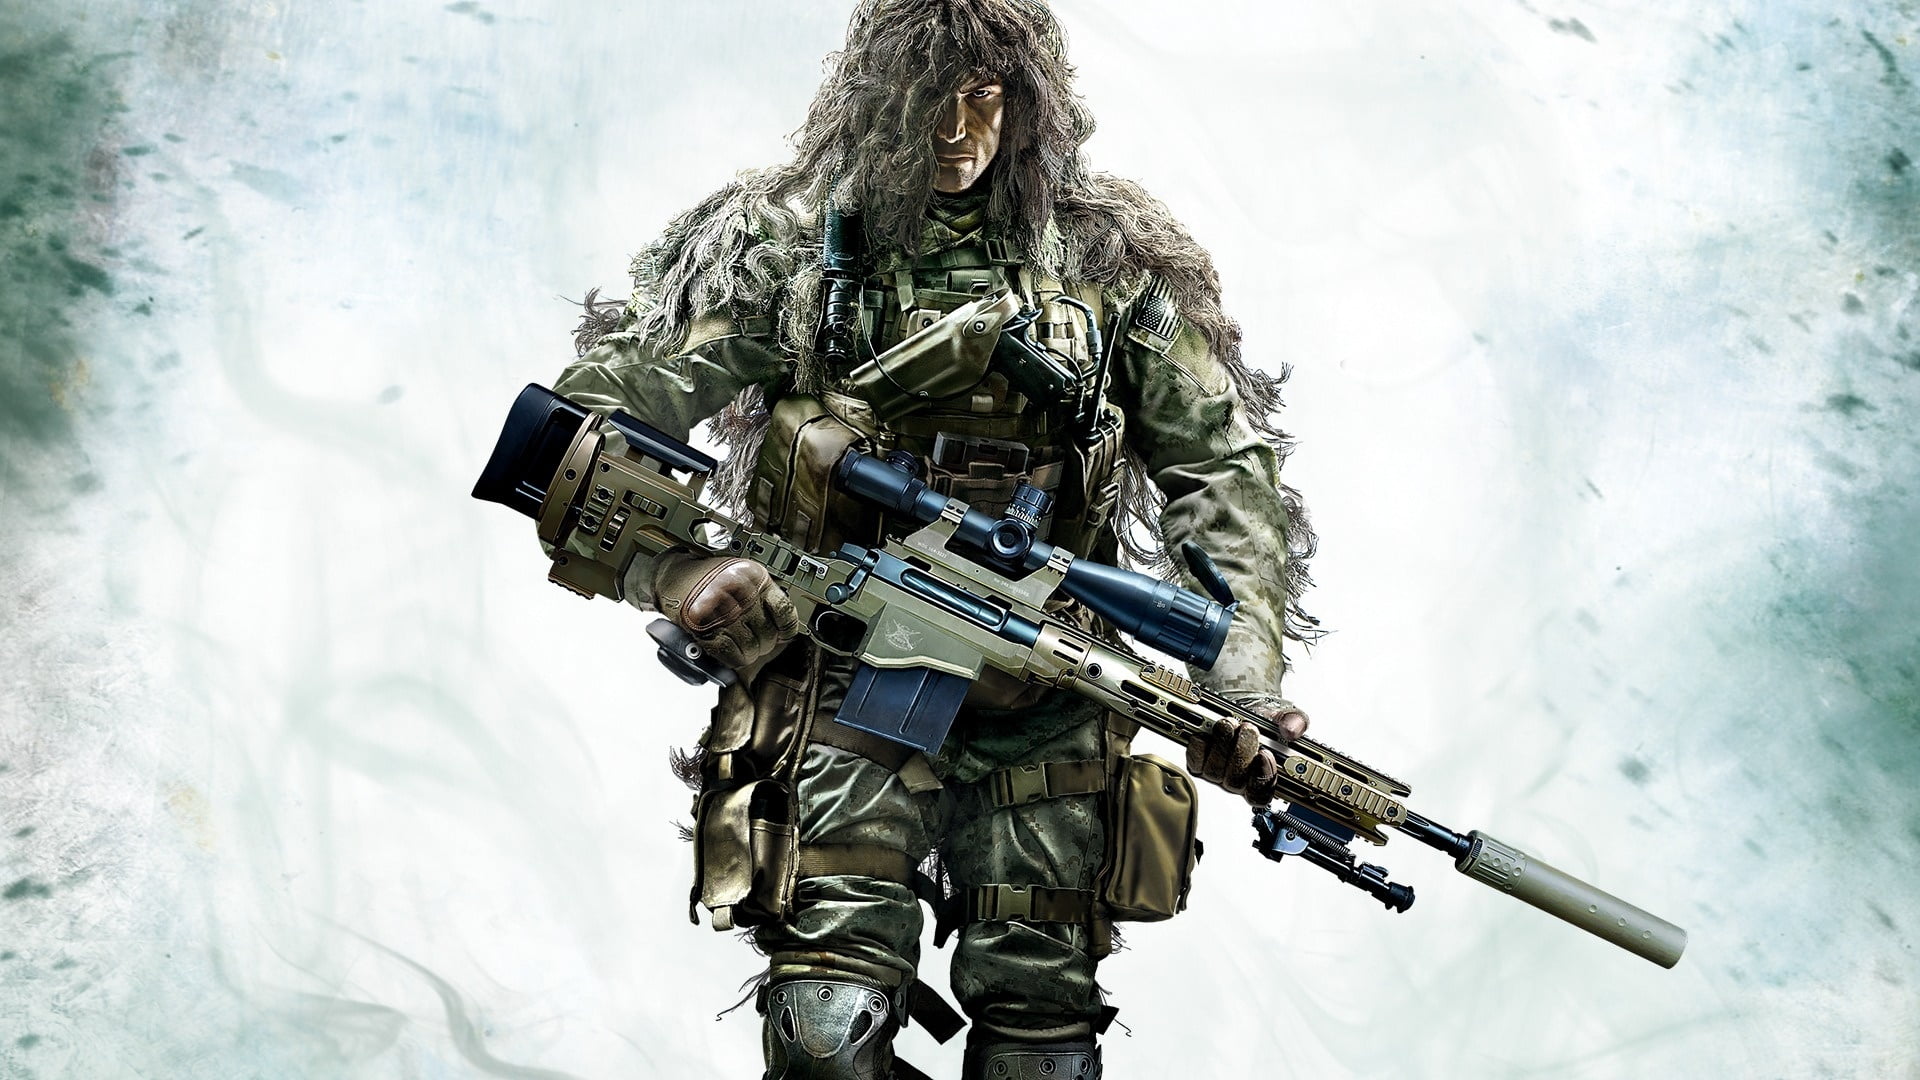 Sniper in camouflage holding sniper rifle